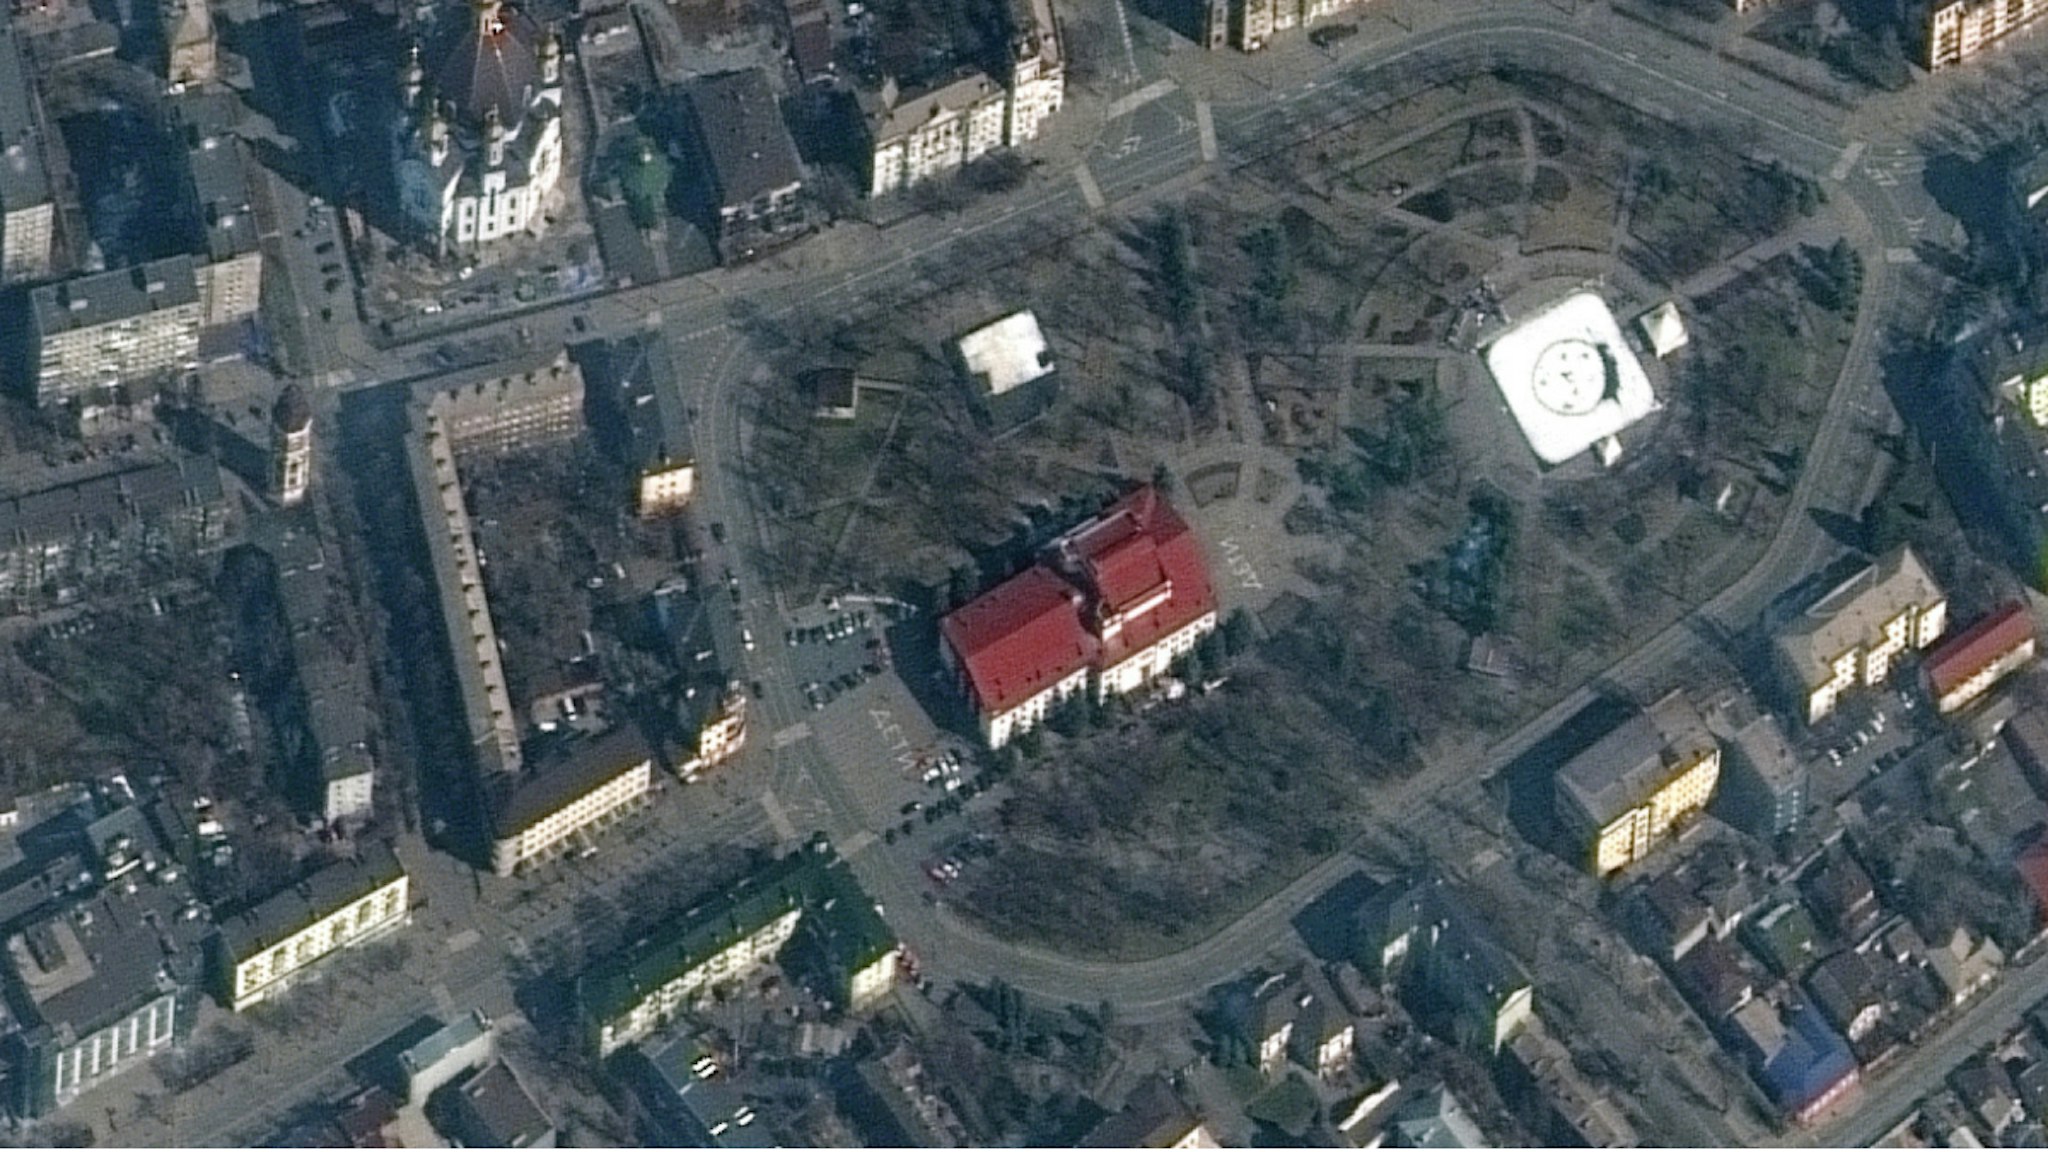 RUSSIANS INVADE UKRAINE -- MARCH 14, 2022: 01 Maxar collected satellite imagery of Mariupol, Ukraine on March 14th that included the Mariupol Drama Theater which was bombed on March 16th. This building had been used as a shelter for hundreds of Ukrainian civilians.